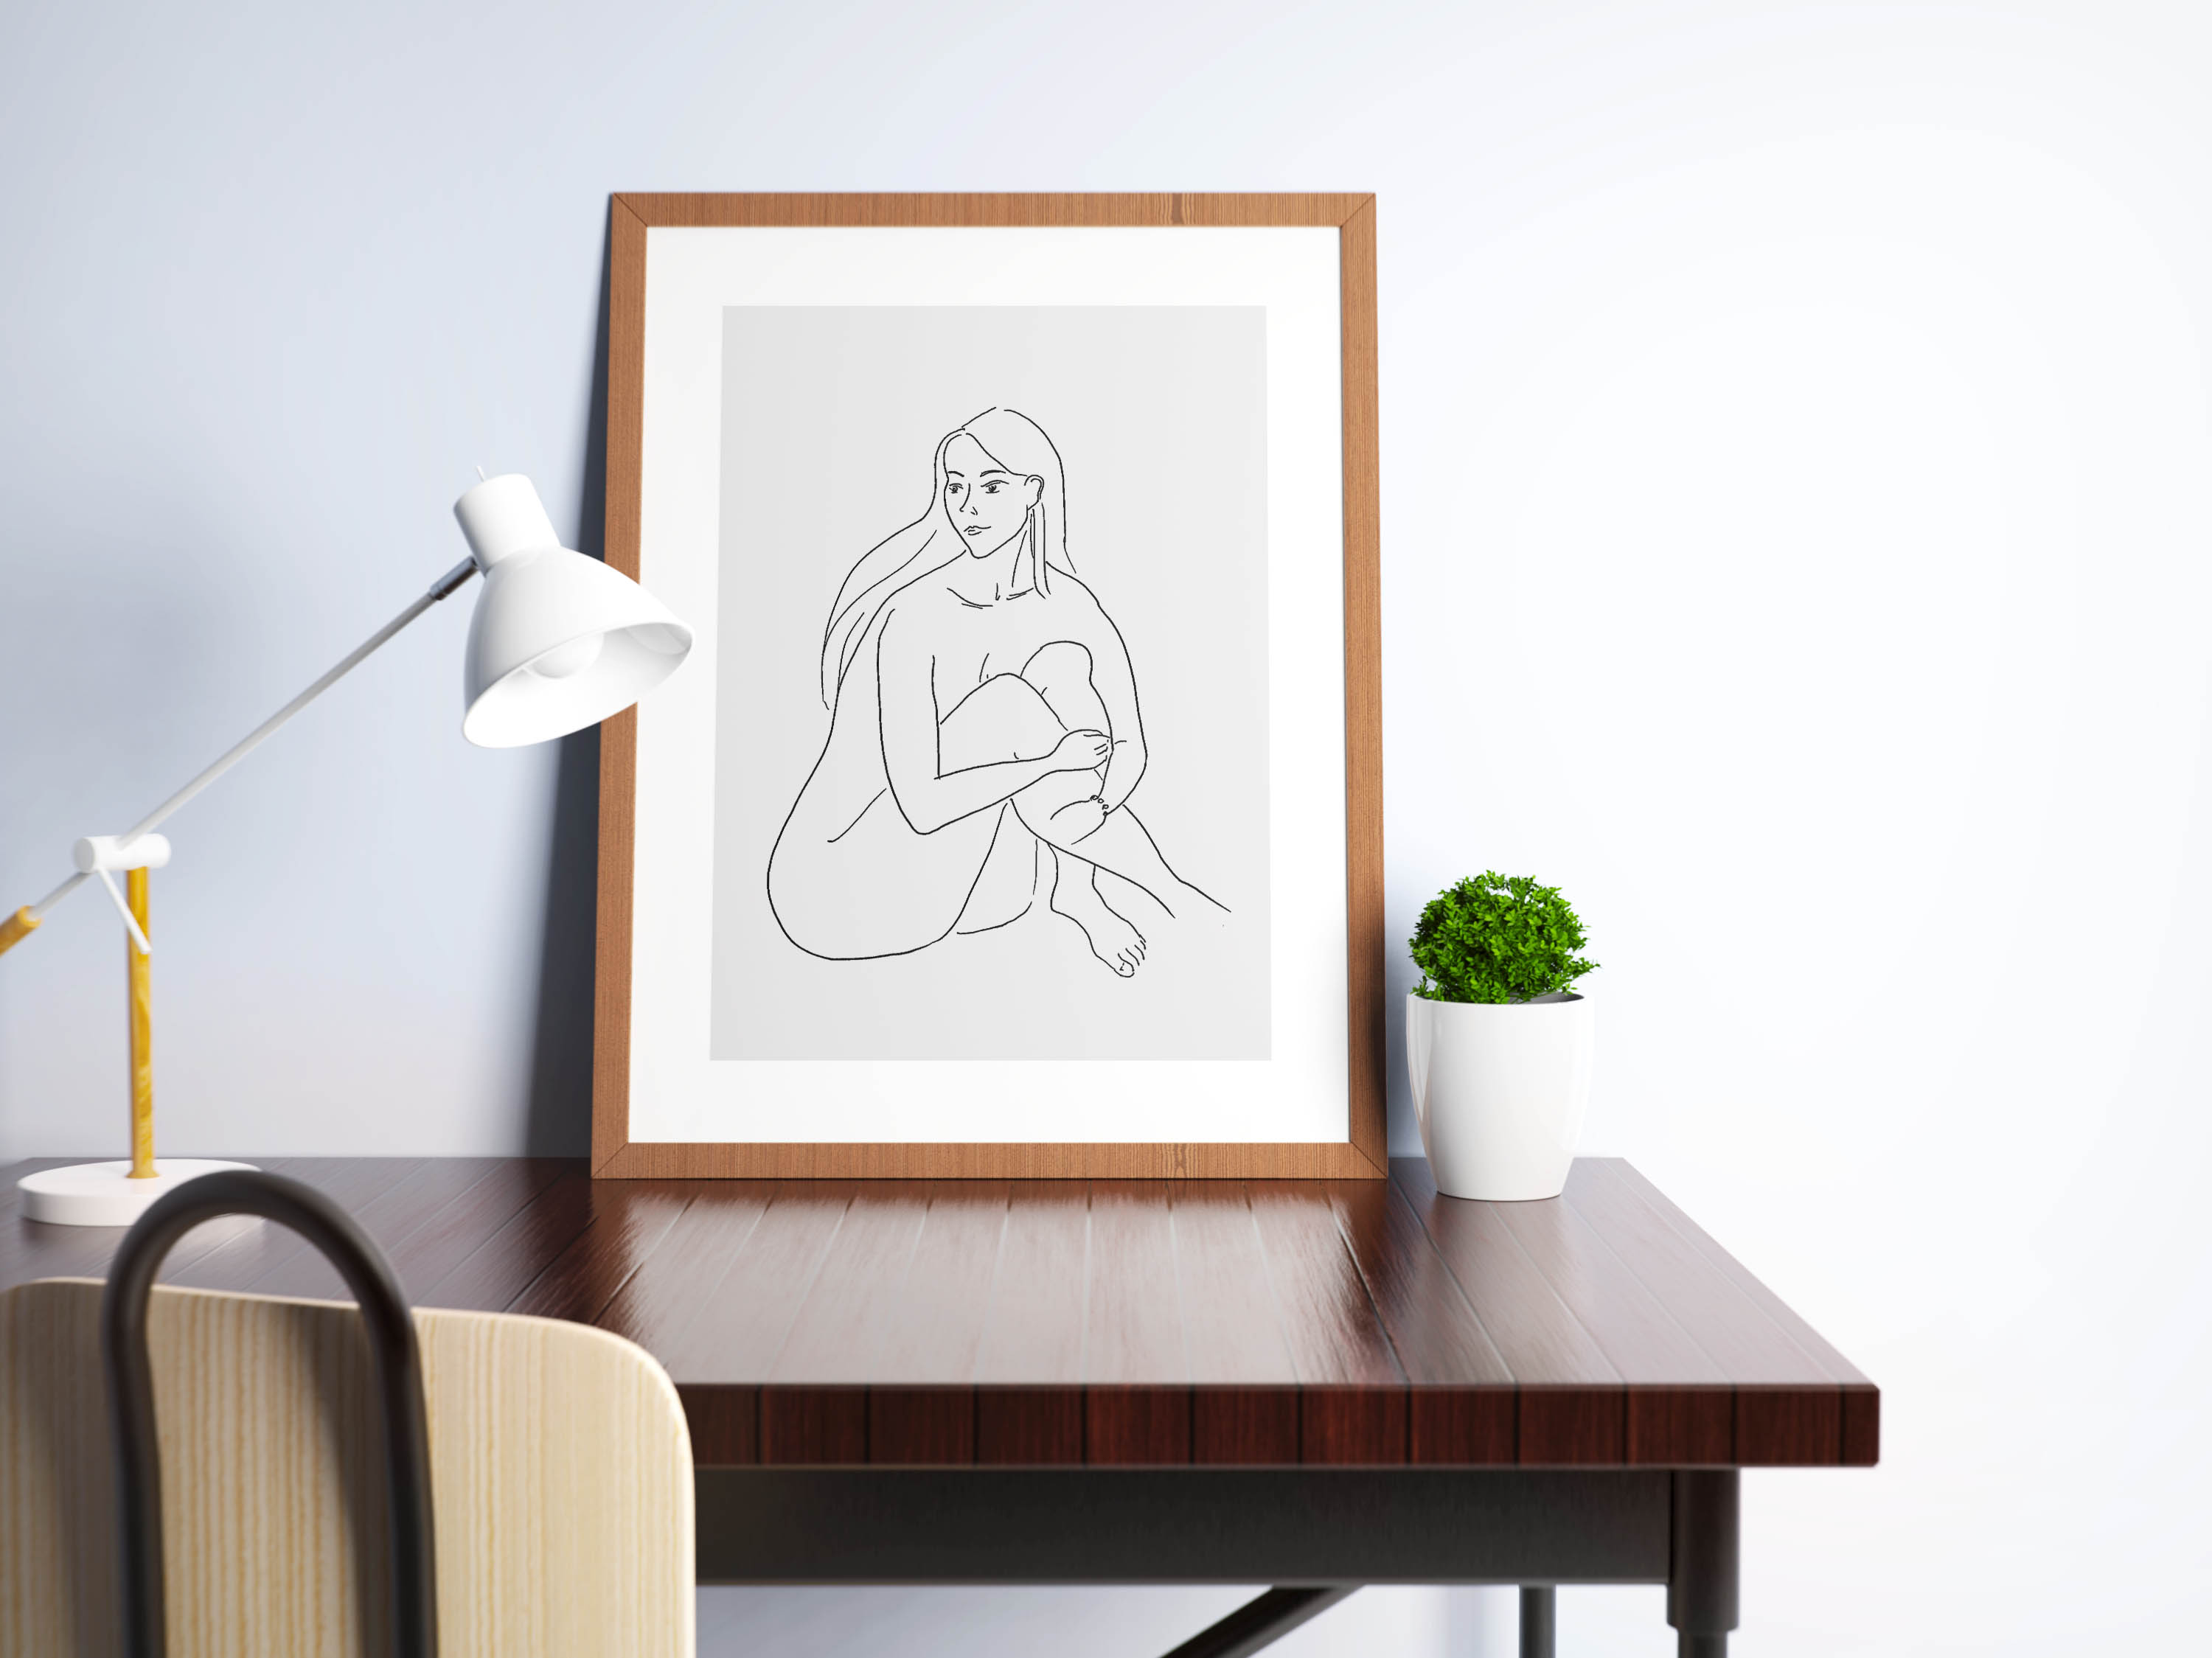 Woman's Body. Line Art Collection